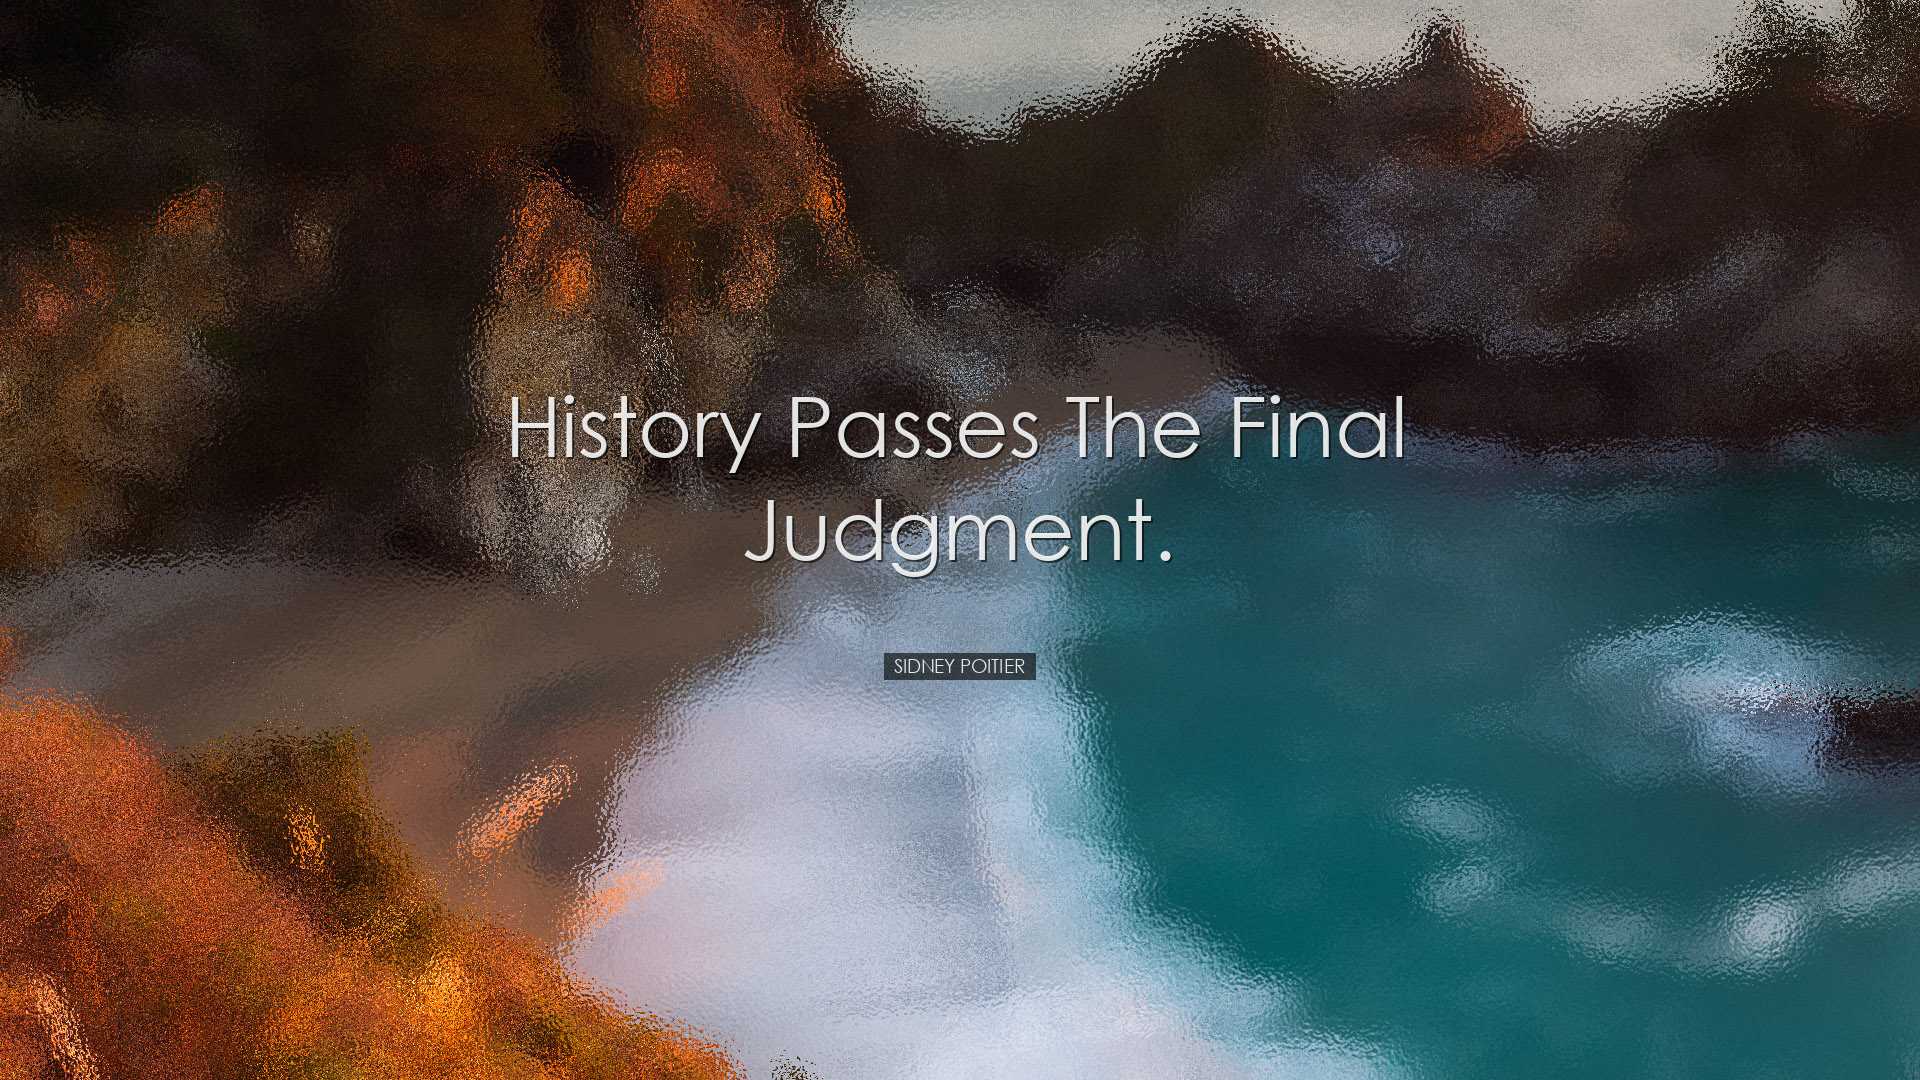 History passes the final judgment. - Sidney Poitier